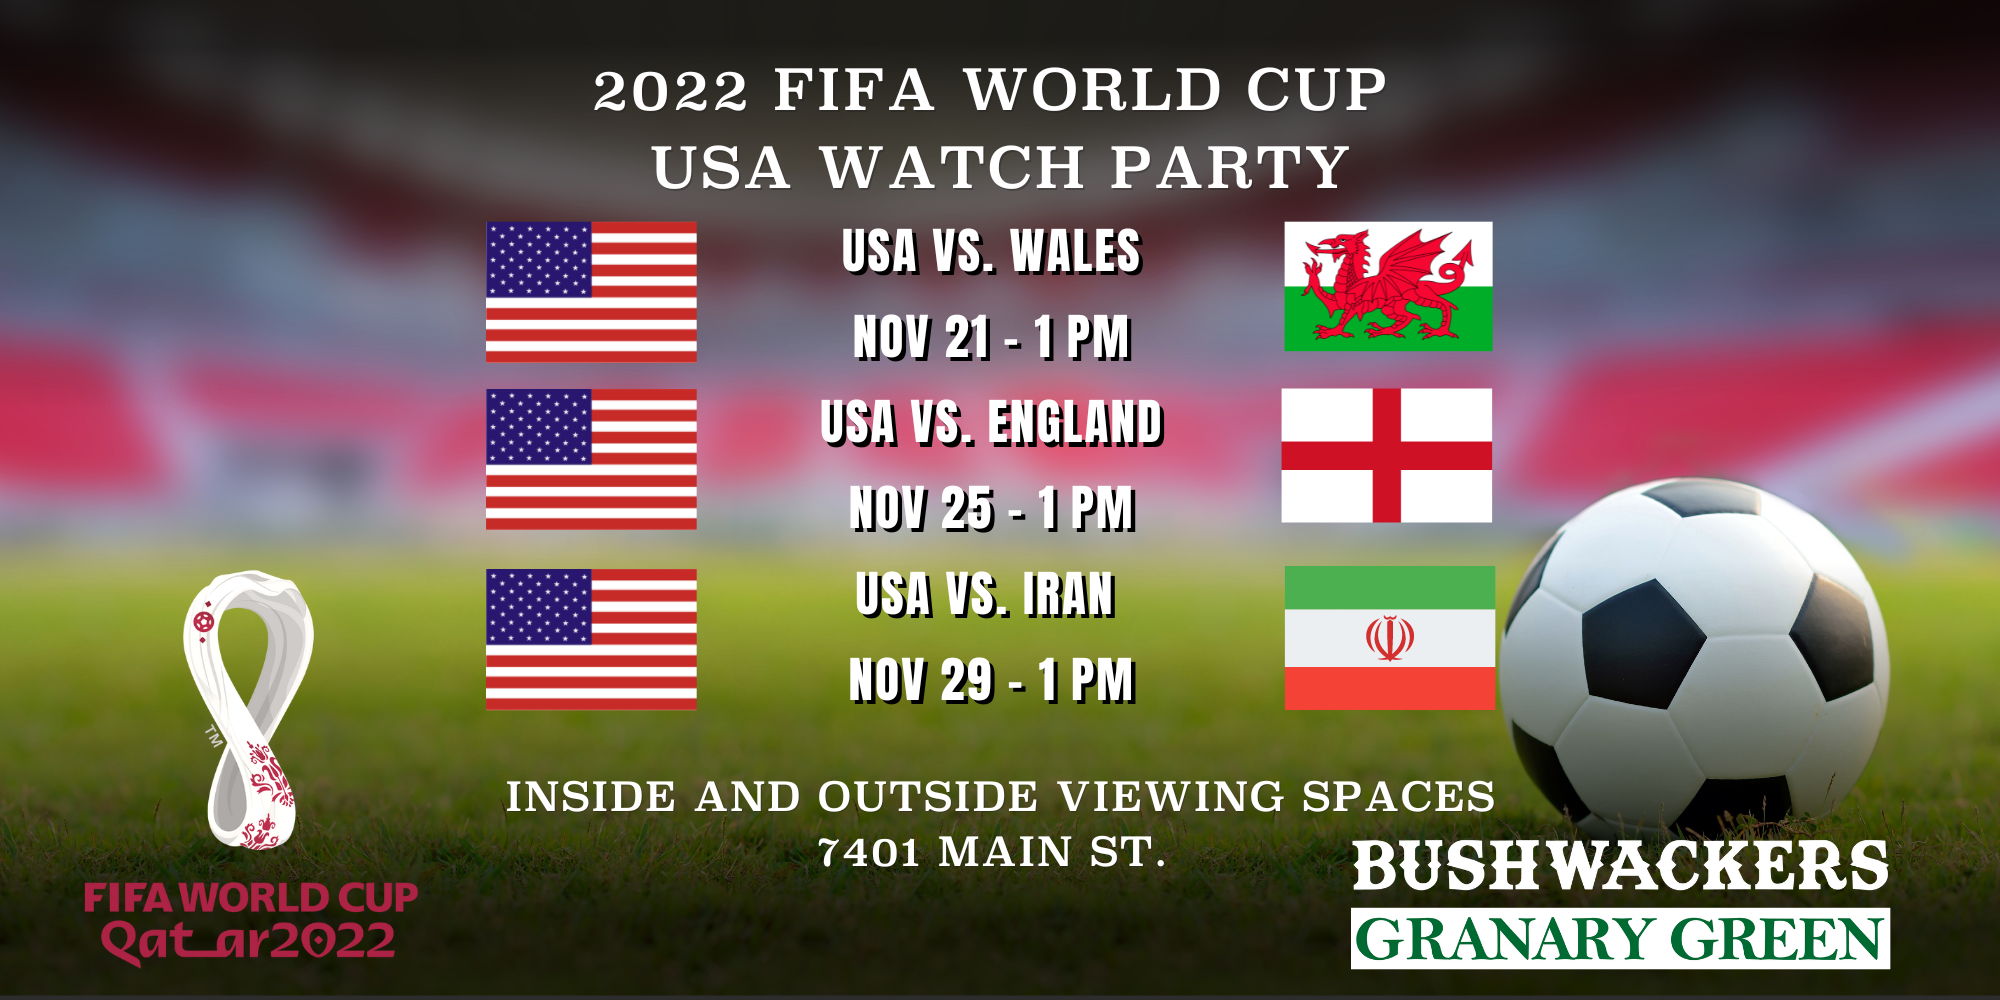 FIFA WC USA Watch Party - USA v. Iran (game time 1pm) promotional image